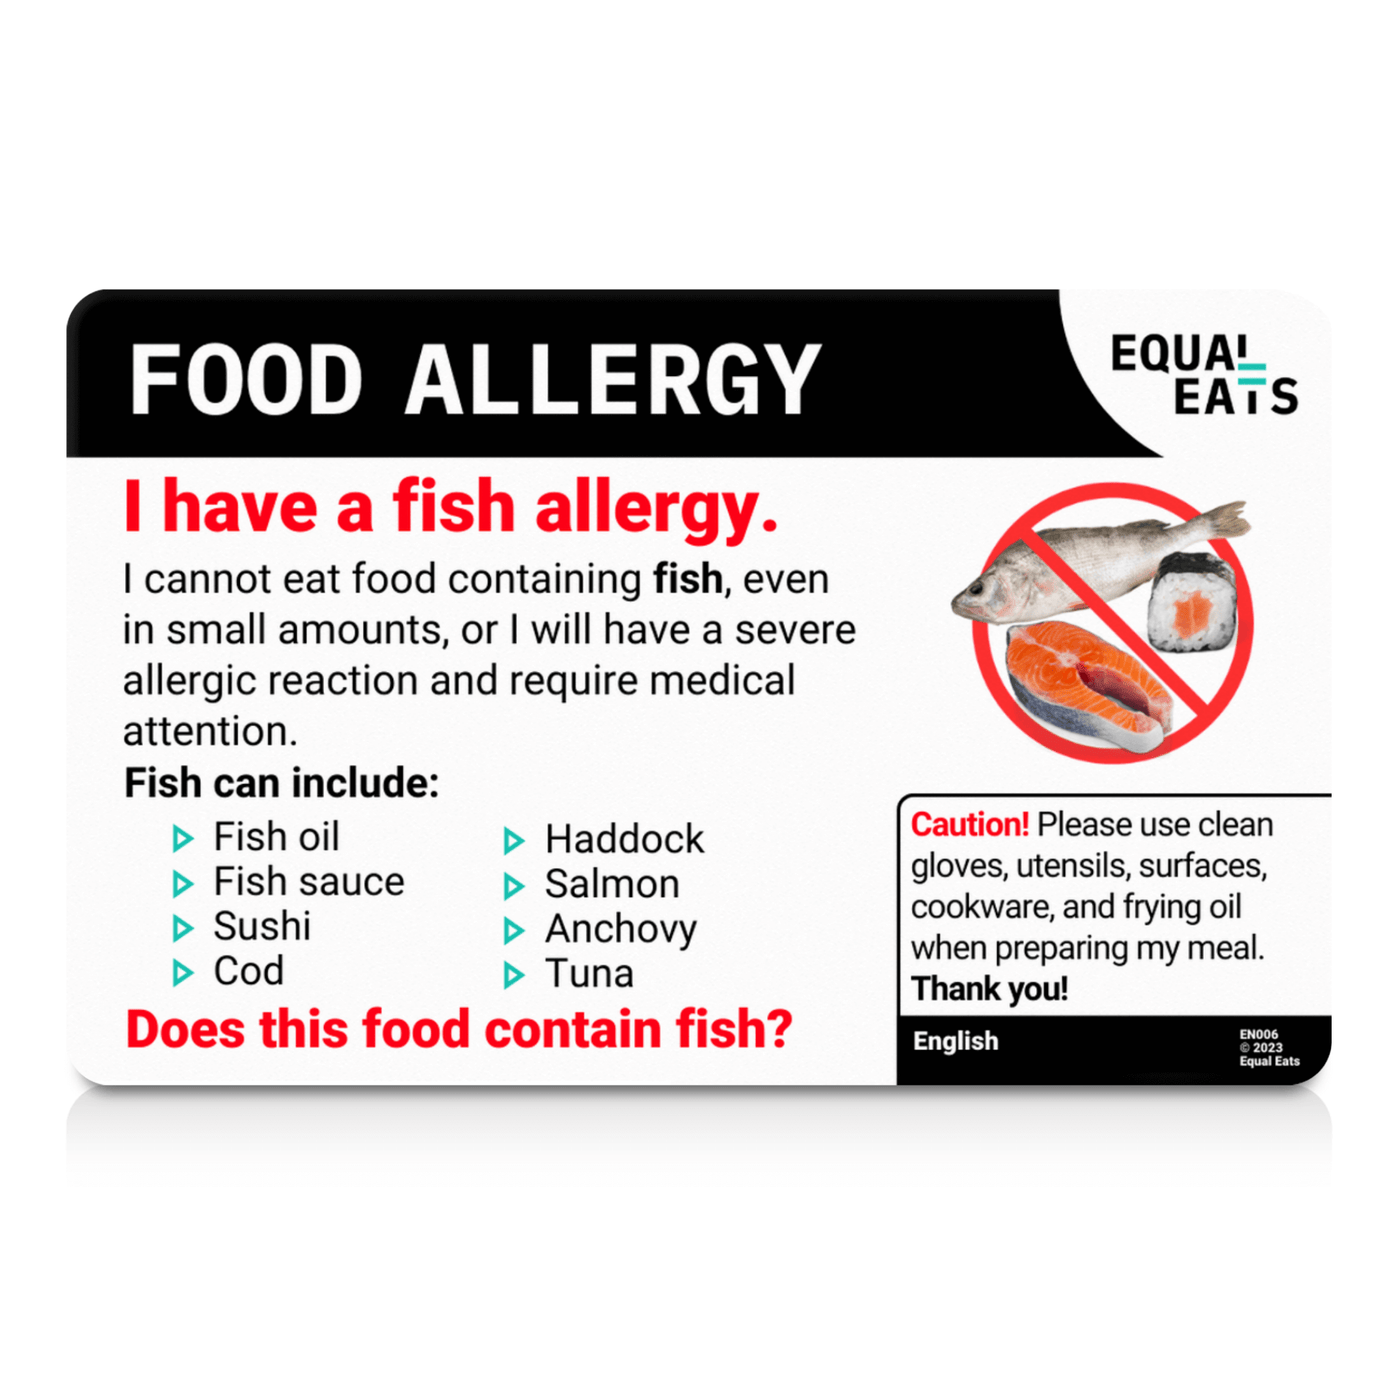 Lithuanian Fish Allergy Card